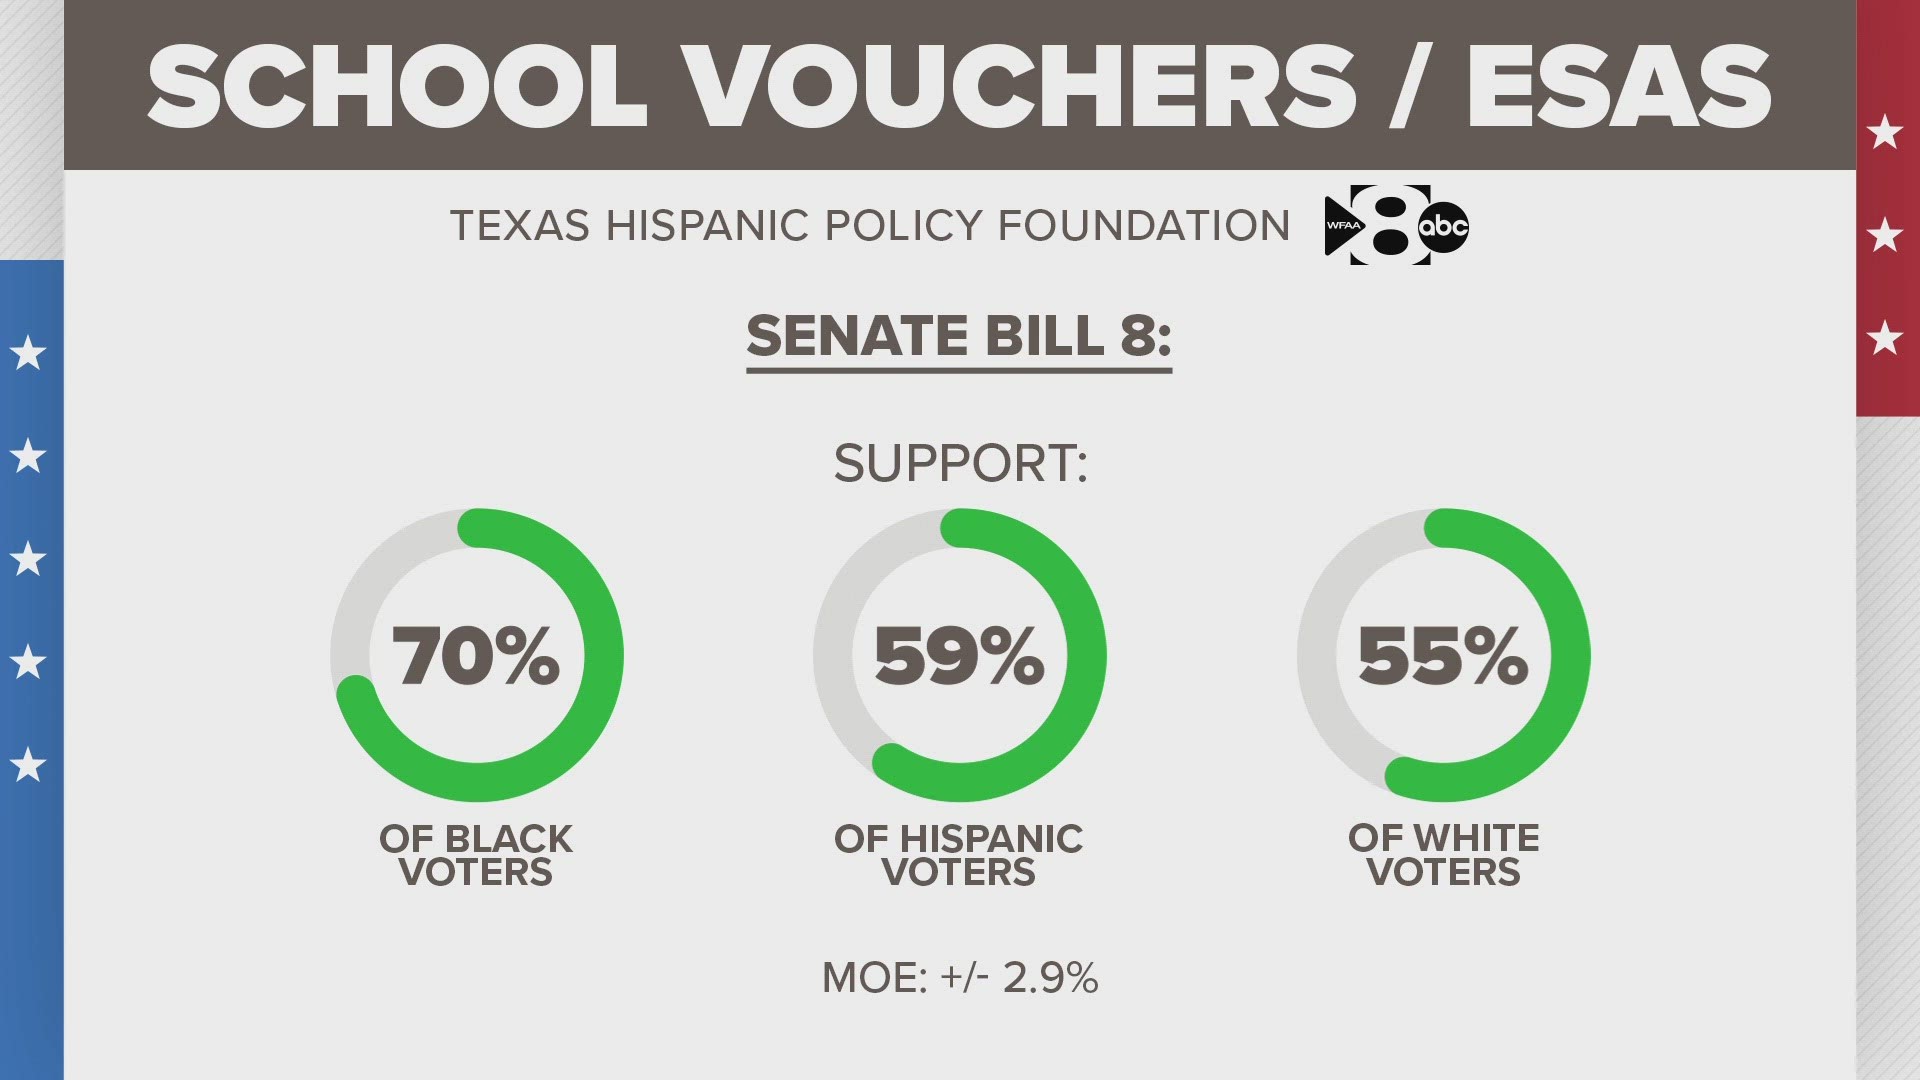 A poll by the Texas Hispanic Policy Foundation and WFAA shows a majority of Texans want to expand school choice.